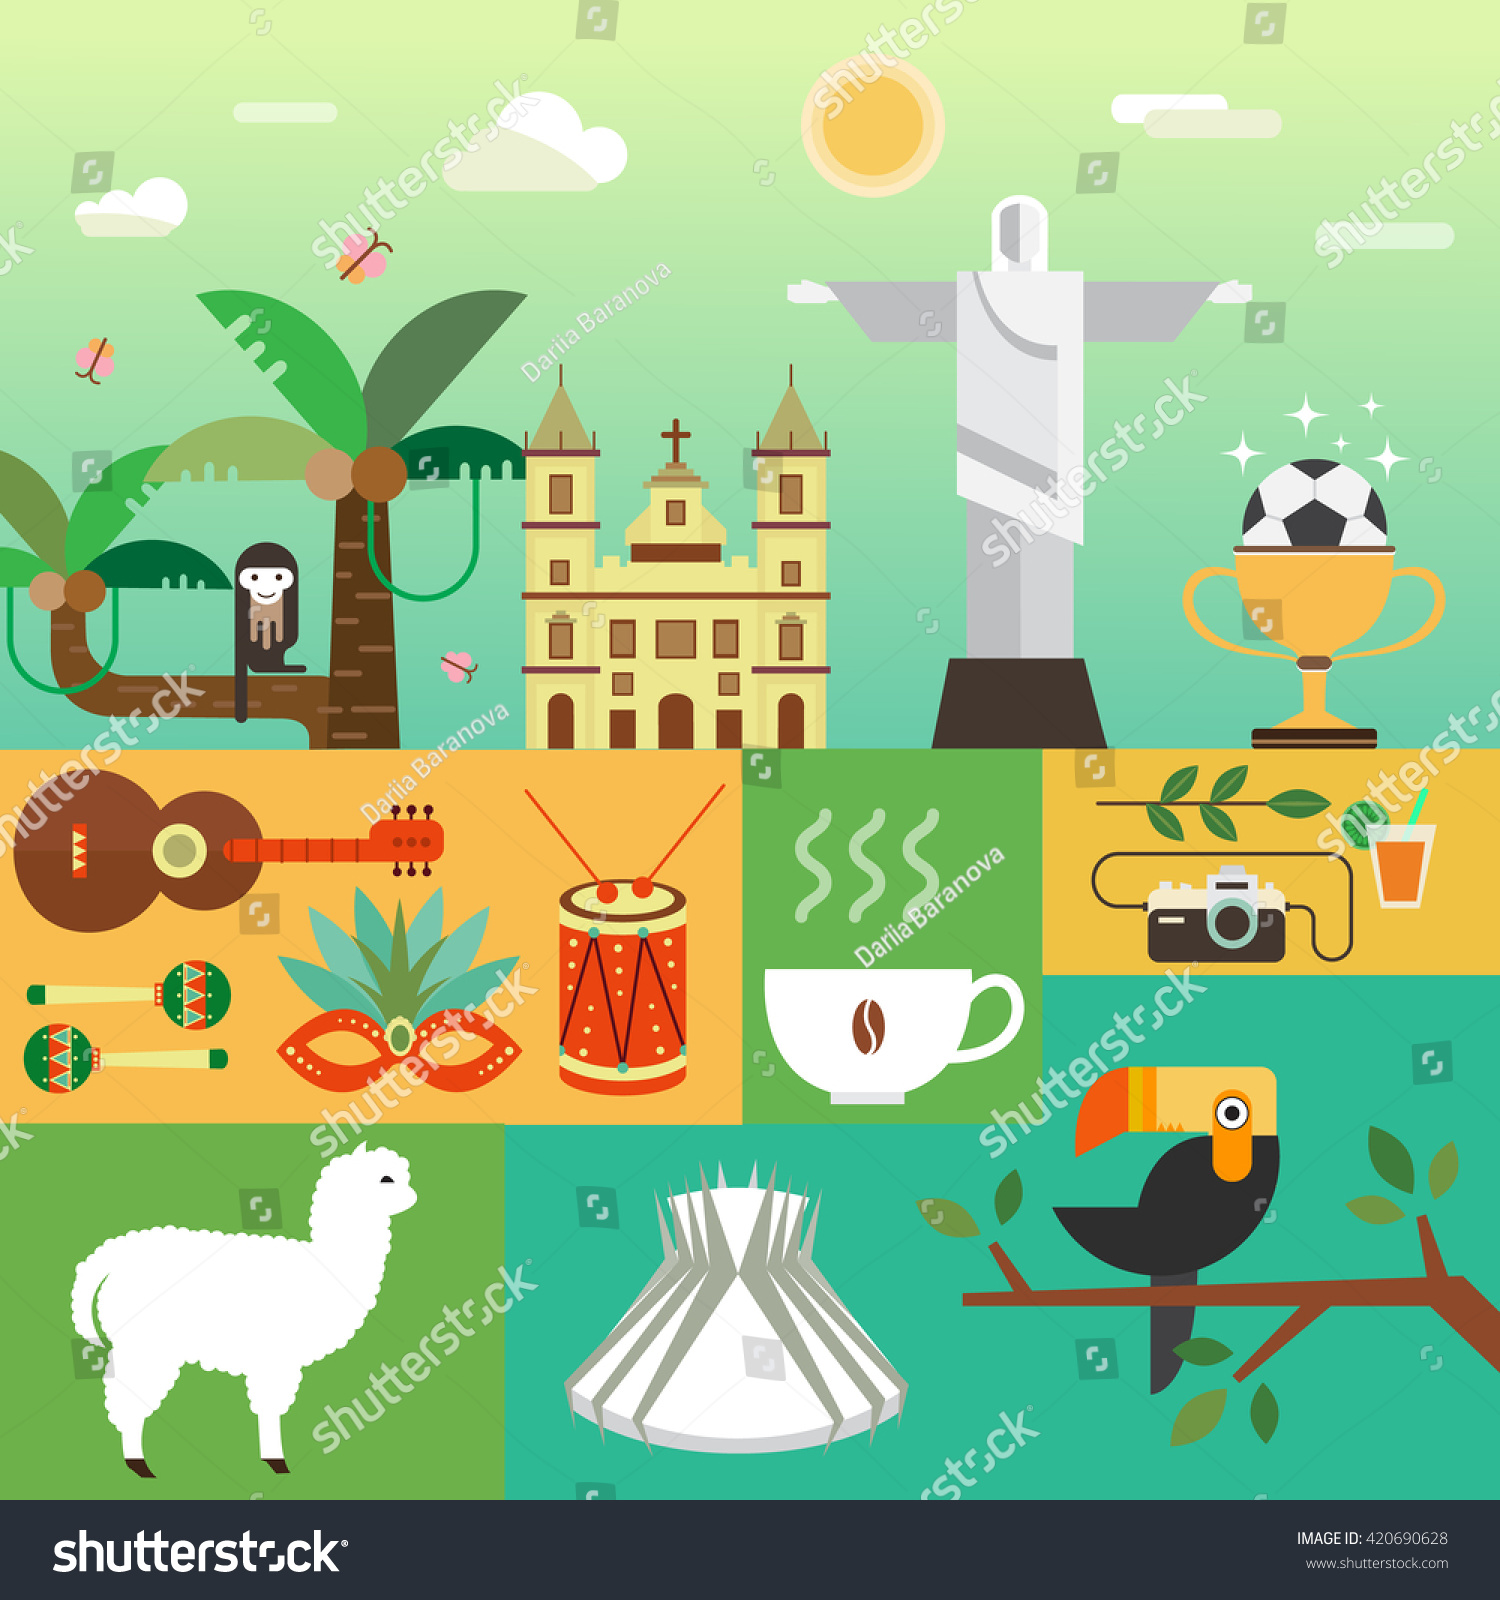 SVG of Vector illustration with Brazil symbols  made in modern flat style. Banner Travel to Brazil concept. Flat icons arranged in square. svg